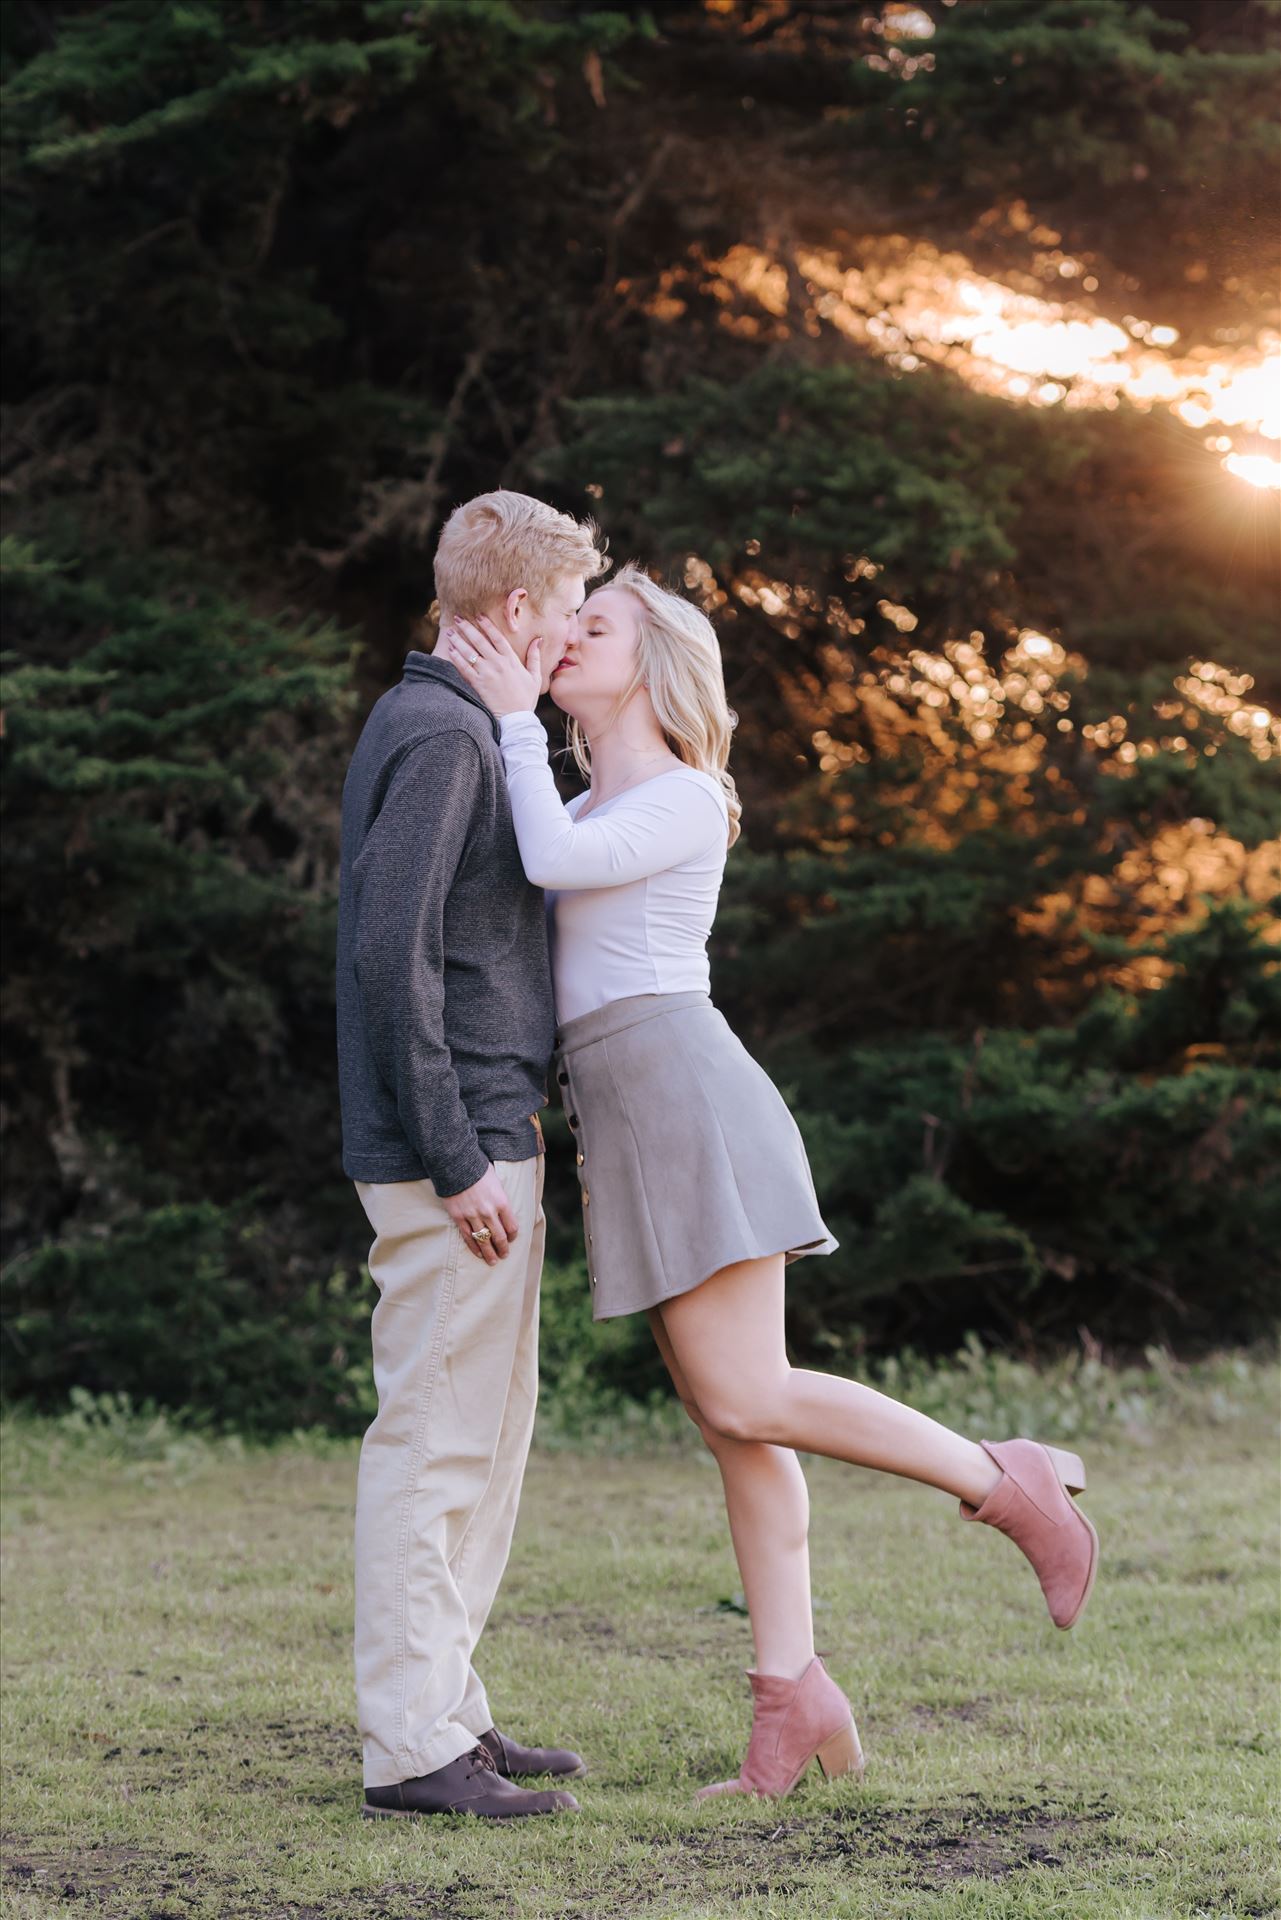 DSC_2452.JPG San Luis Obispo and Santa Barbara County Wedding and Engagement Photography. Mirror's Edge Photography captures Montana de Oro Engagement Session.  Kissing at sunset. by Sarah Williams